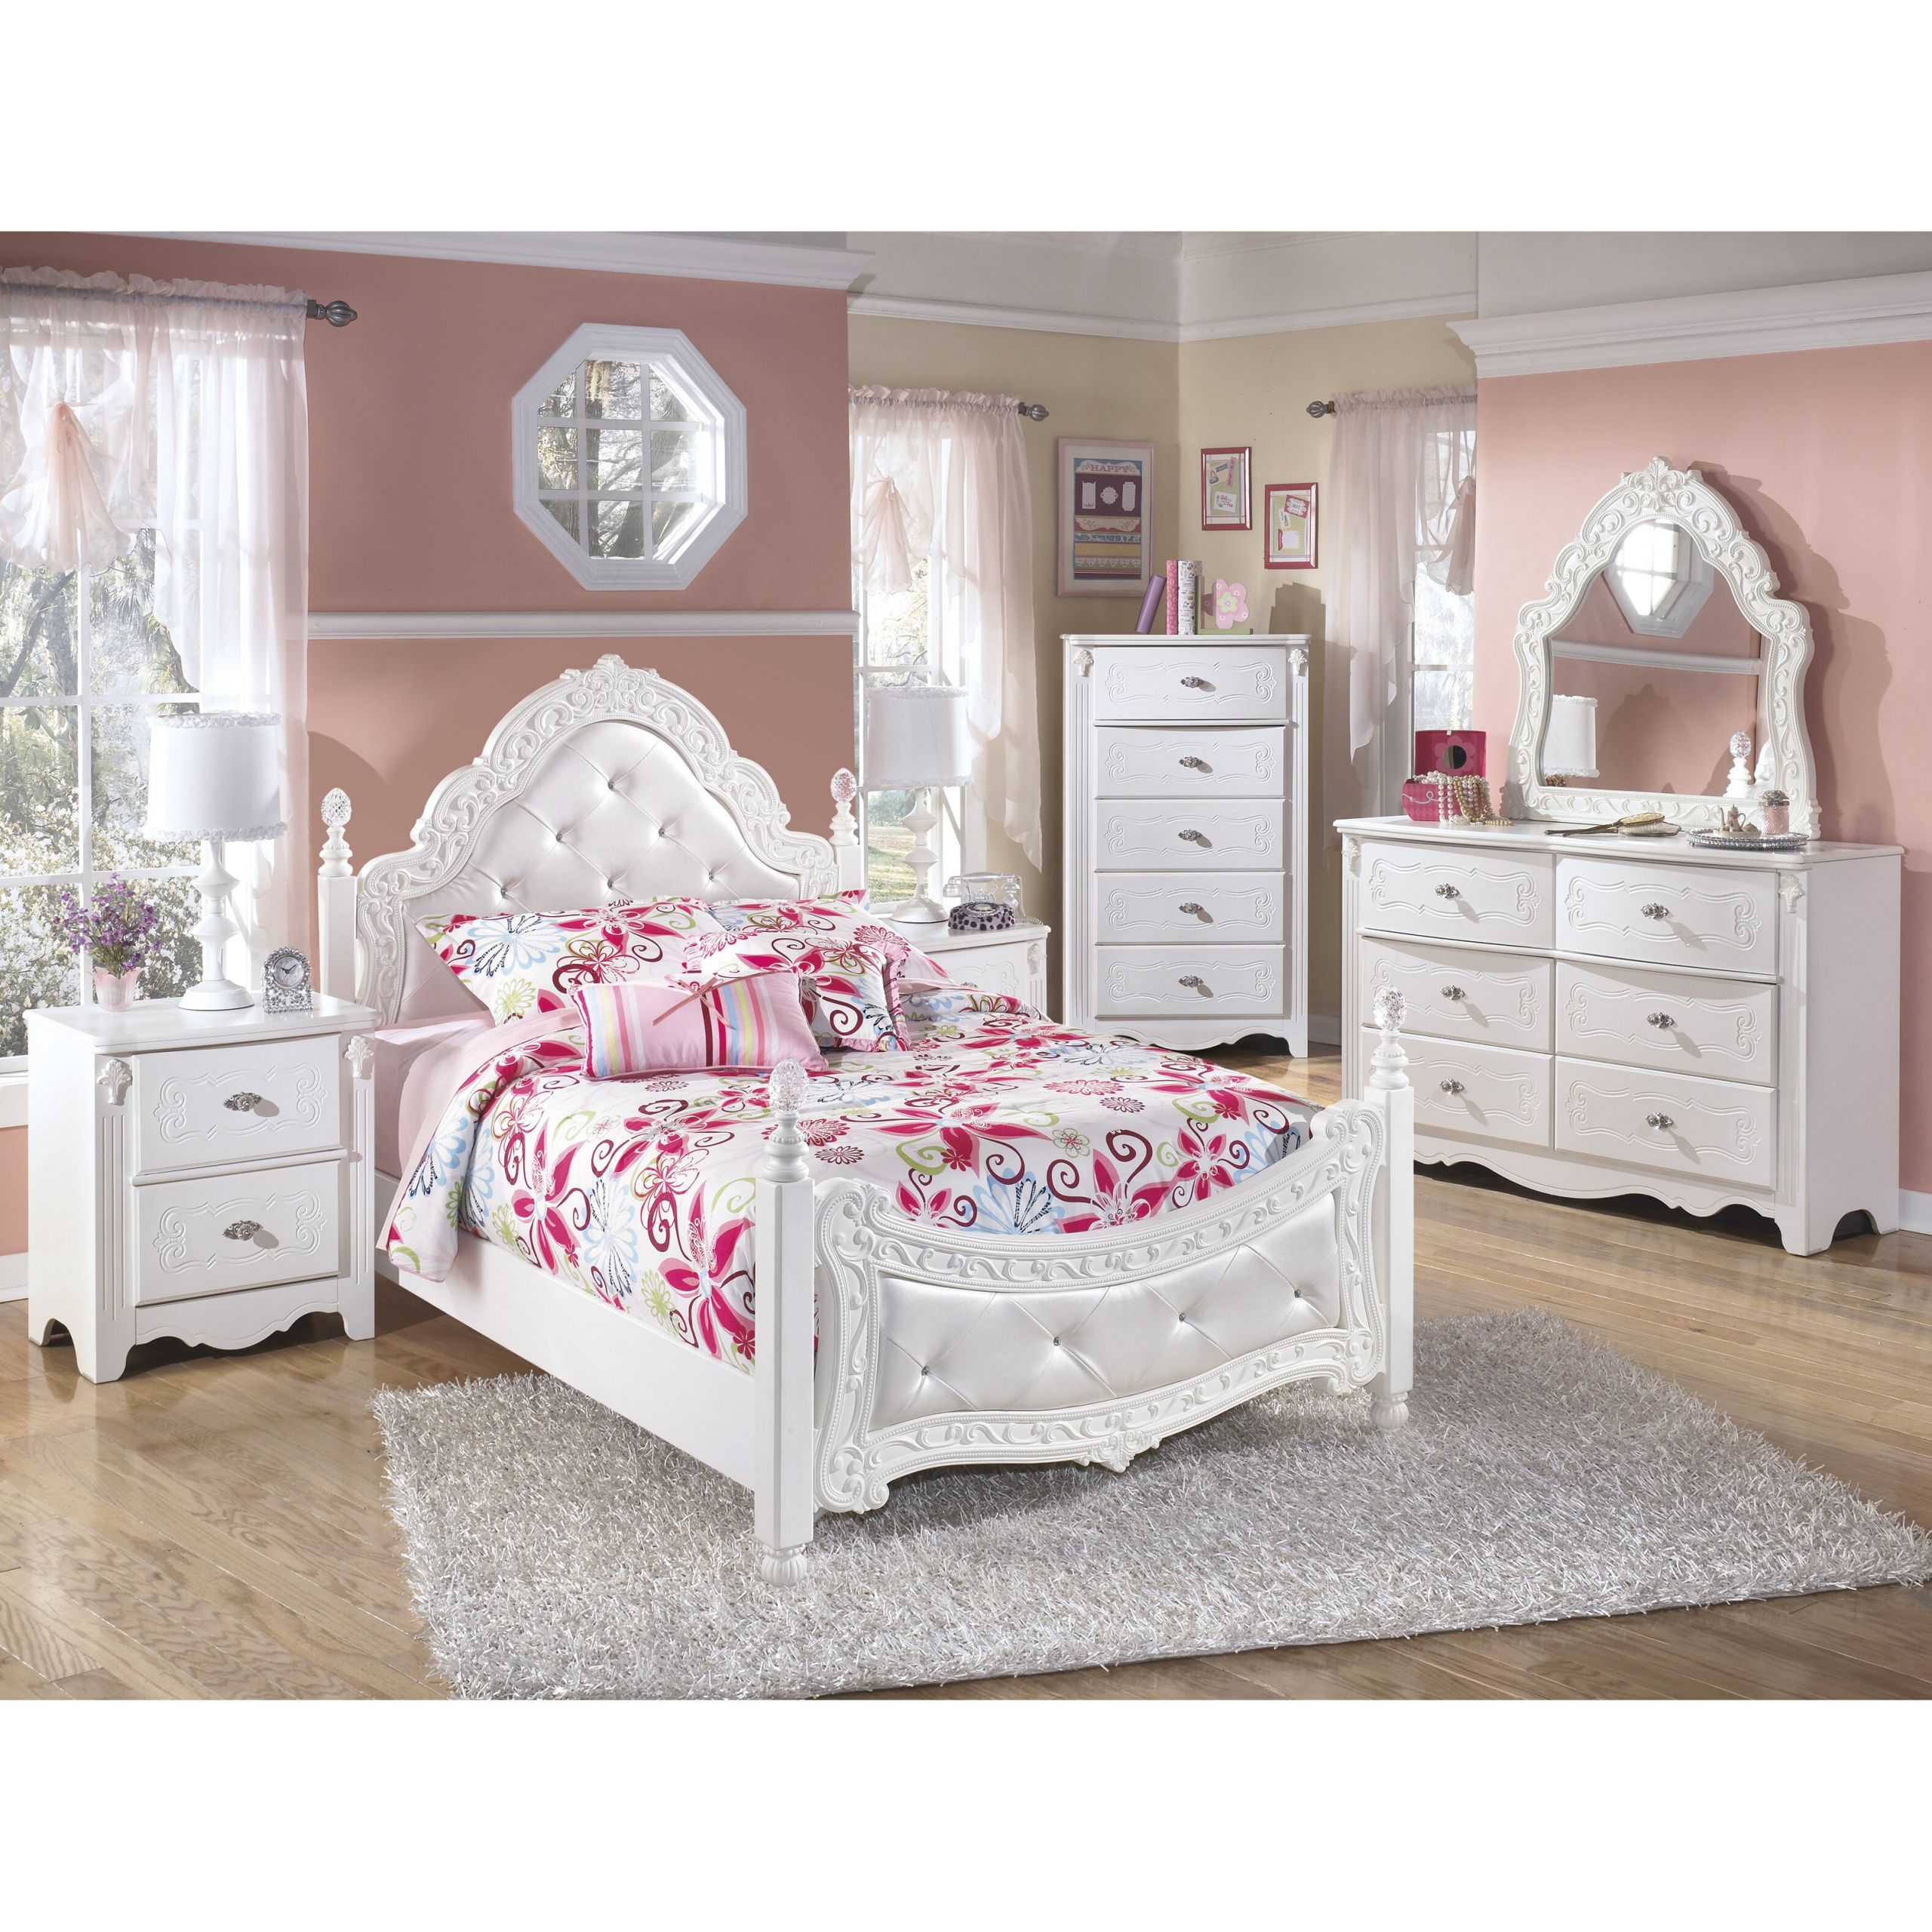 Kids Bedroom Chairs
 Signature Design by Ashley Exquisite Four Poster